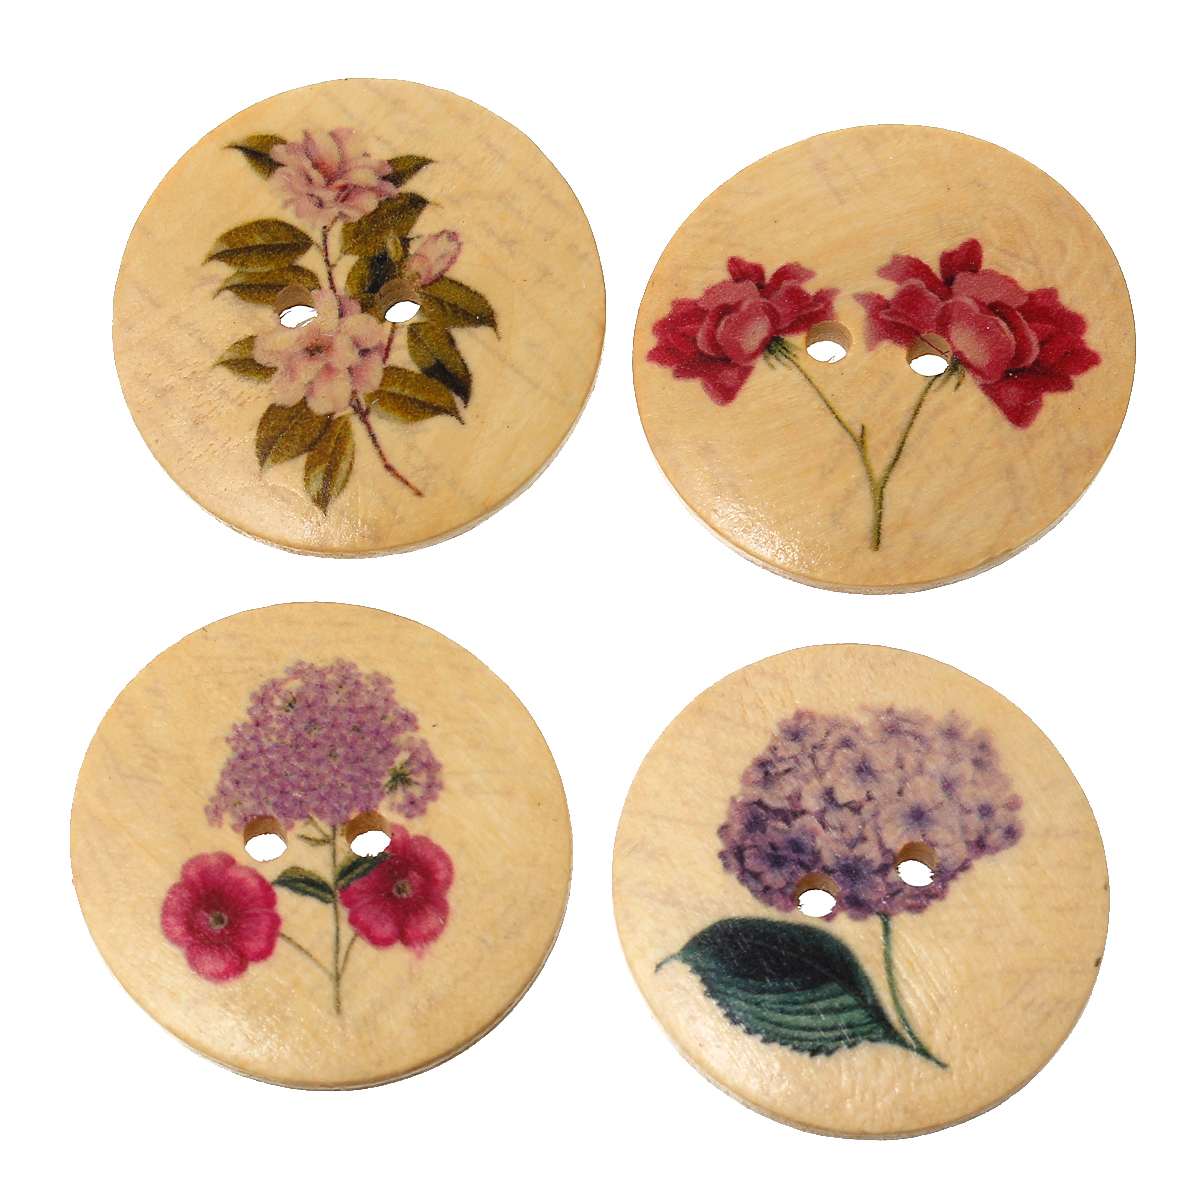 Picture of Wood Sewing Buttons Scrapbooking Round At Random 2 Holes Flower Pattern 3cm Dia, 20 PCs